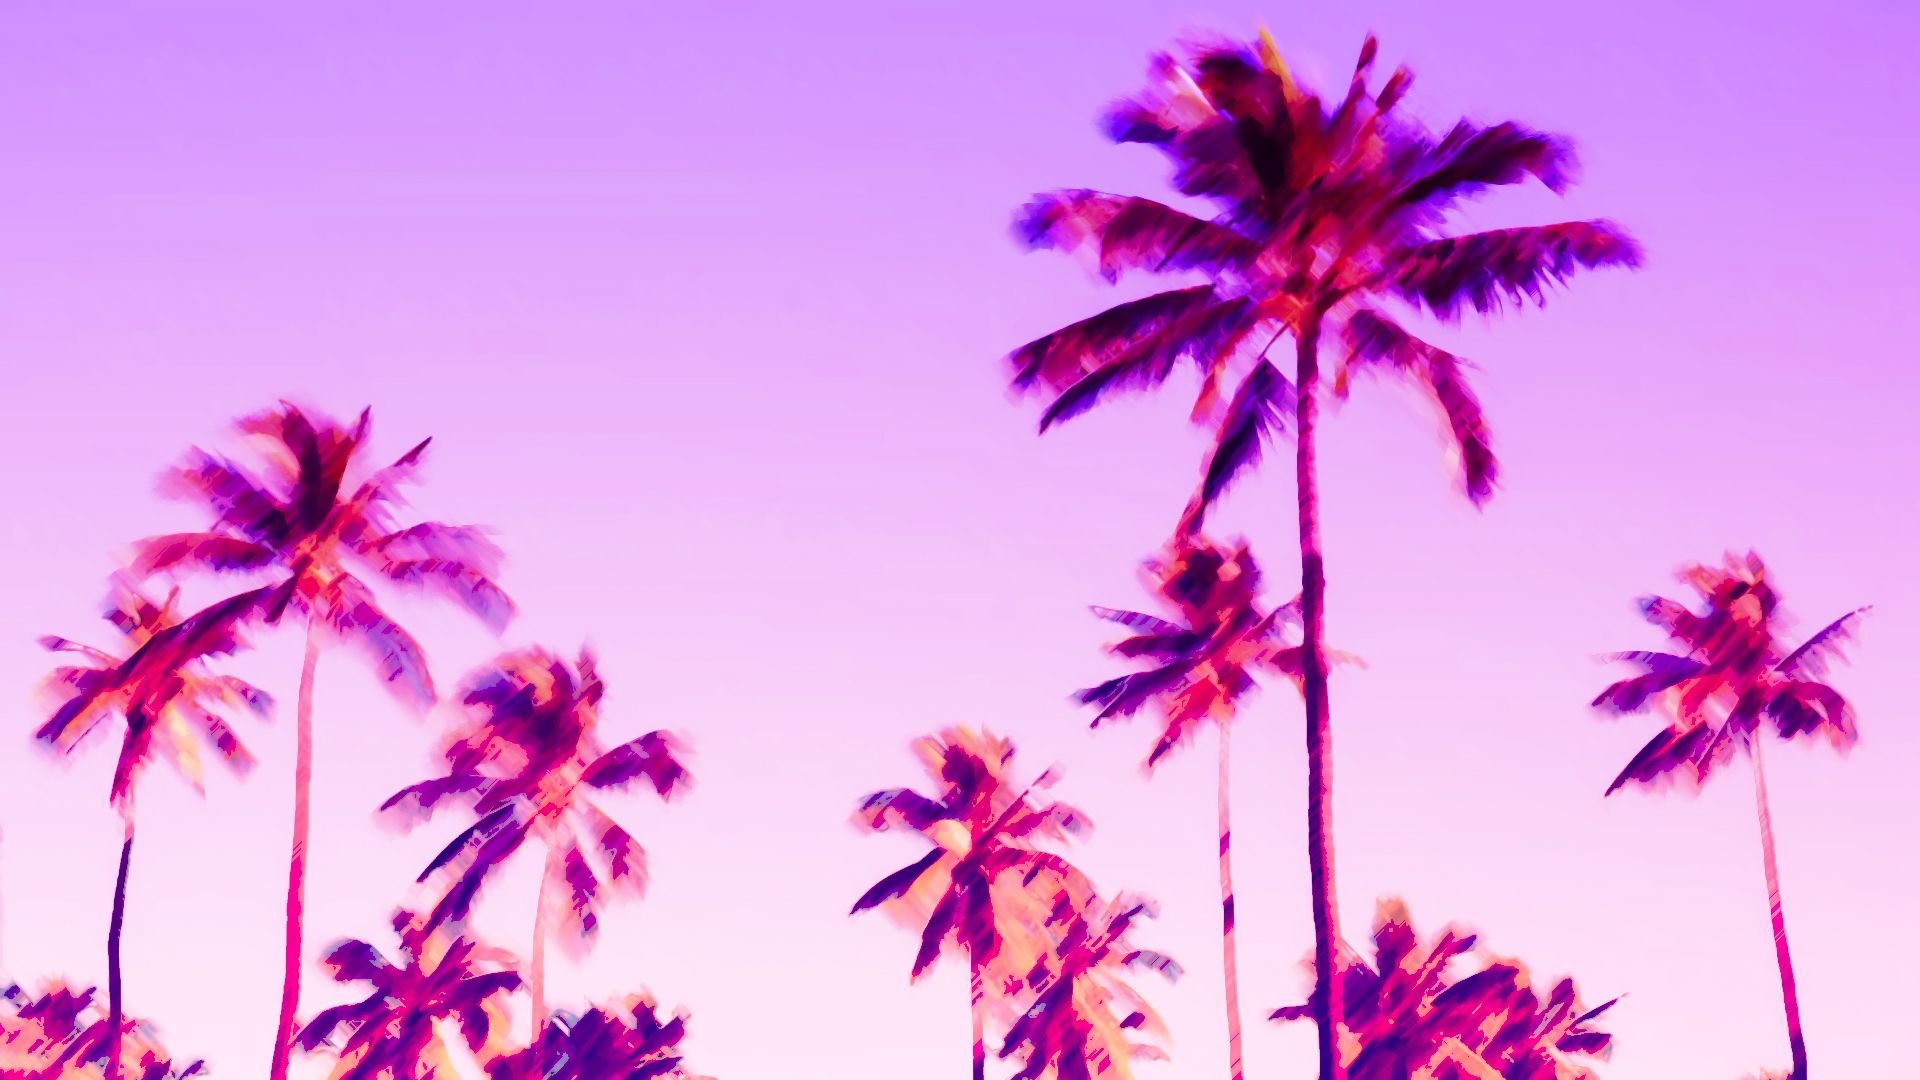 Purple Palm Trees Hd Wallpapers Wallpaper Cave